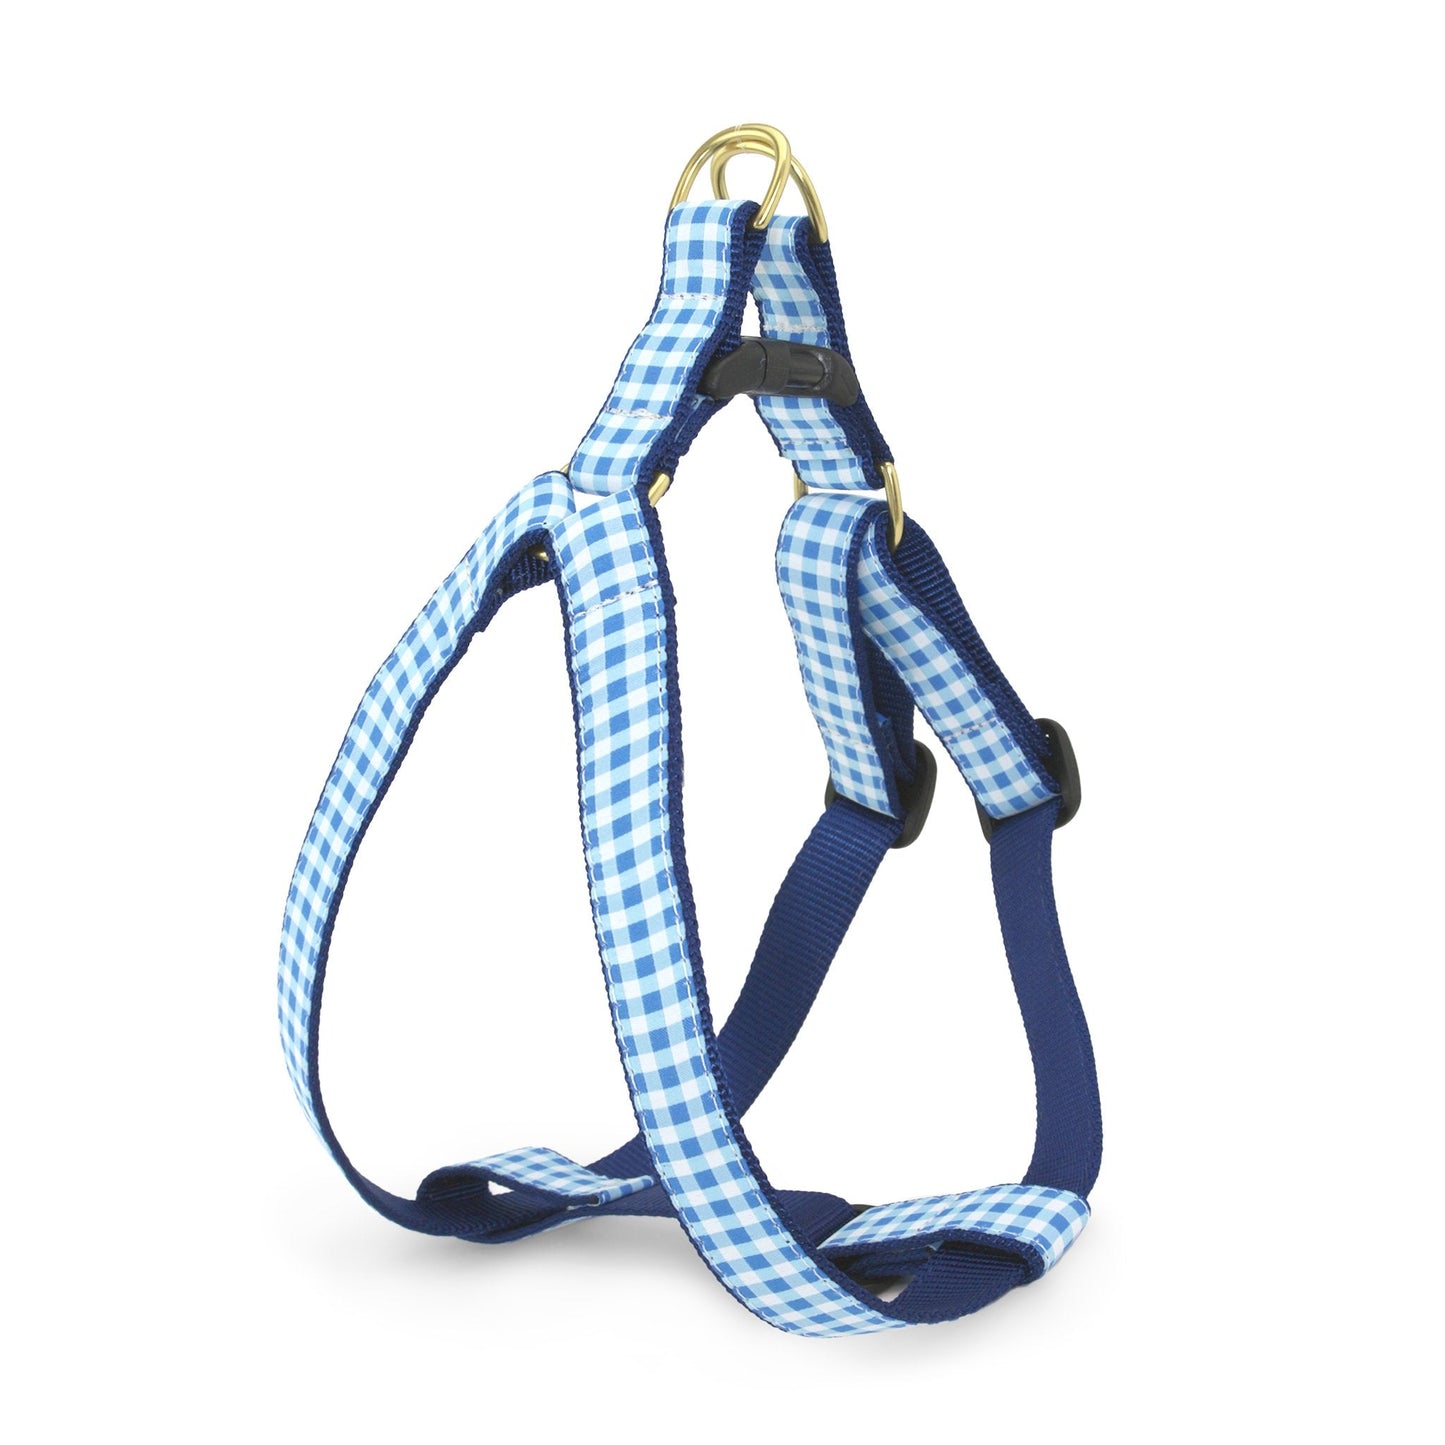 Blue Gingham Dog Harness by Up Country